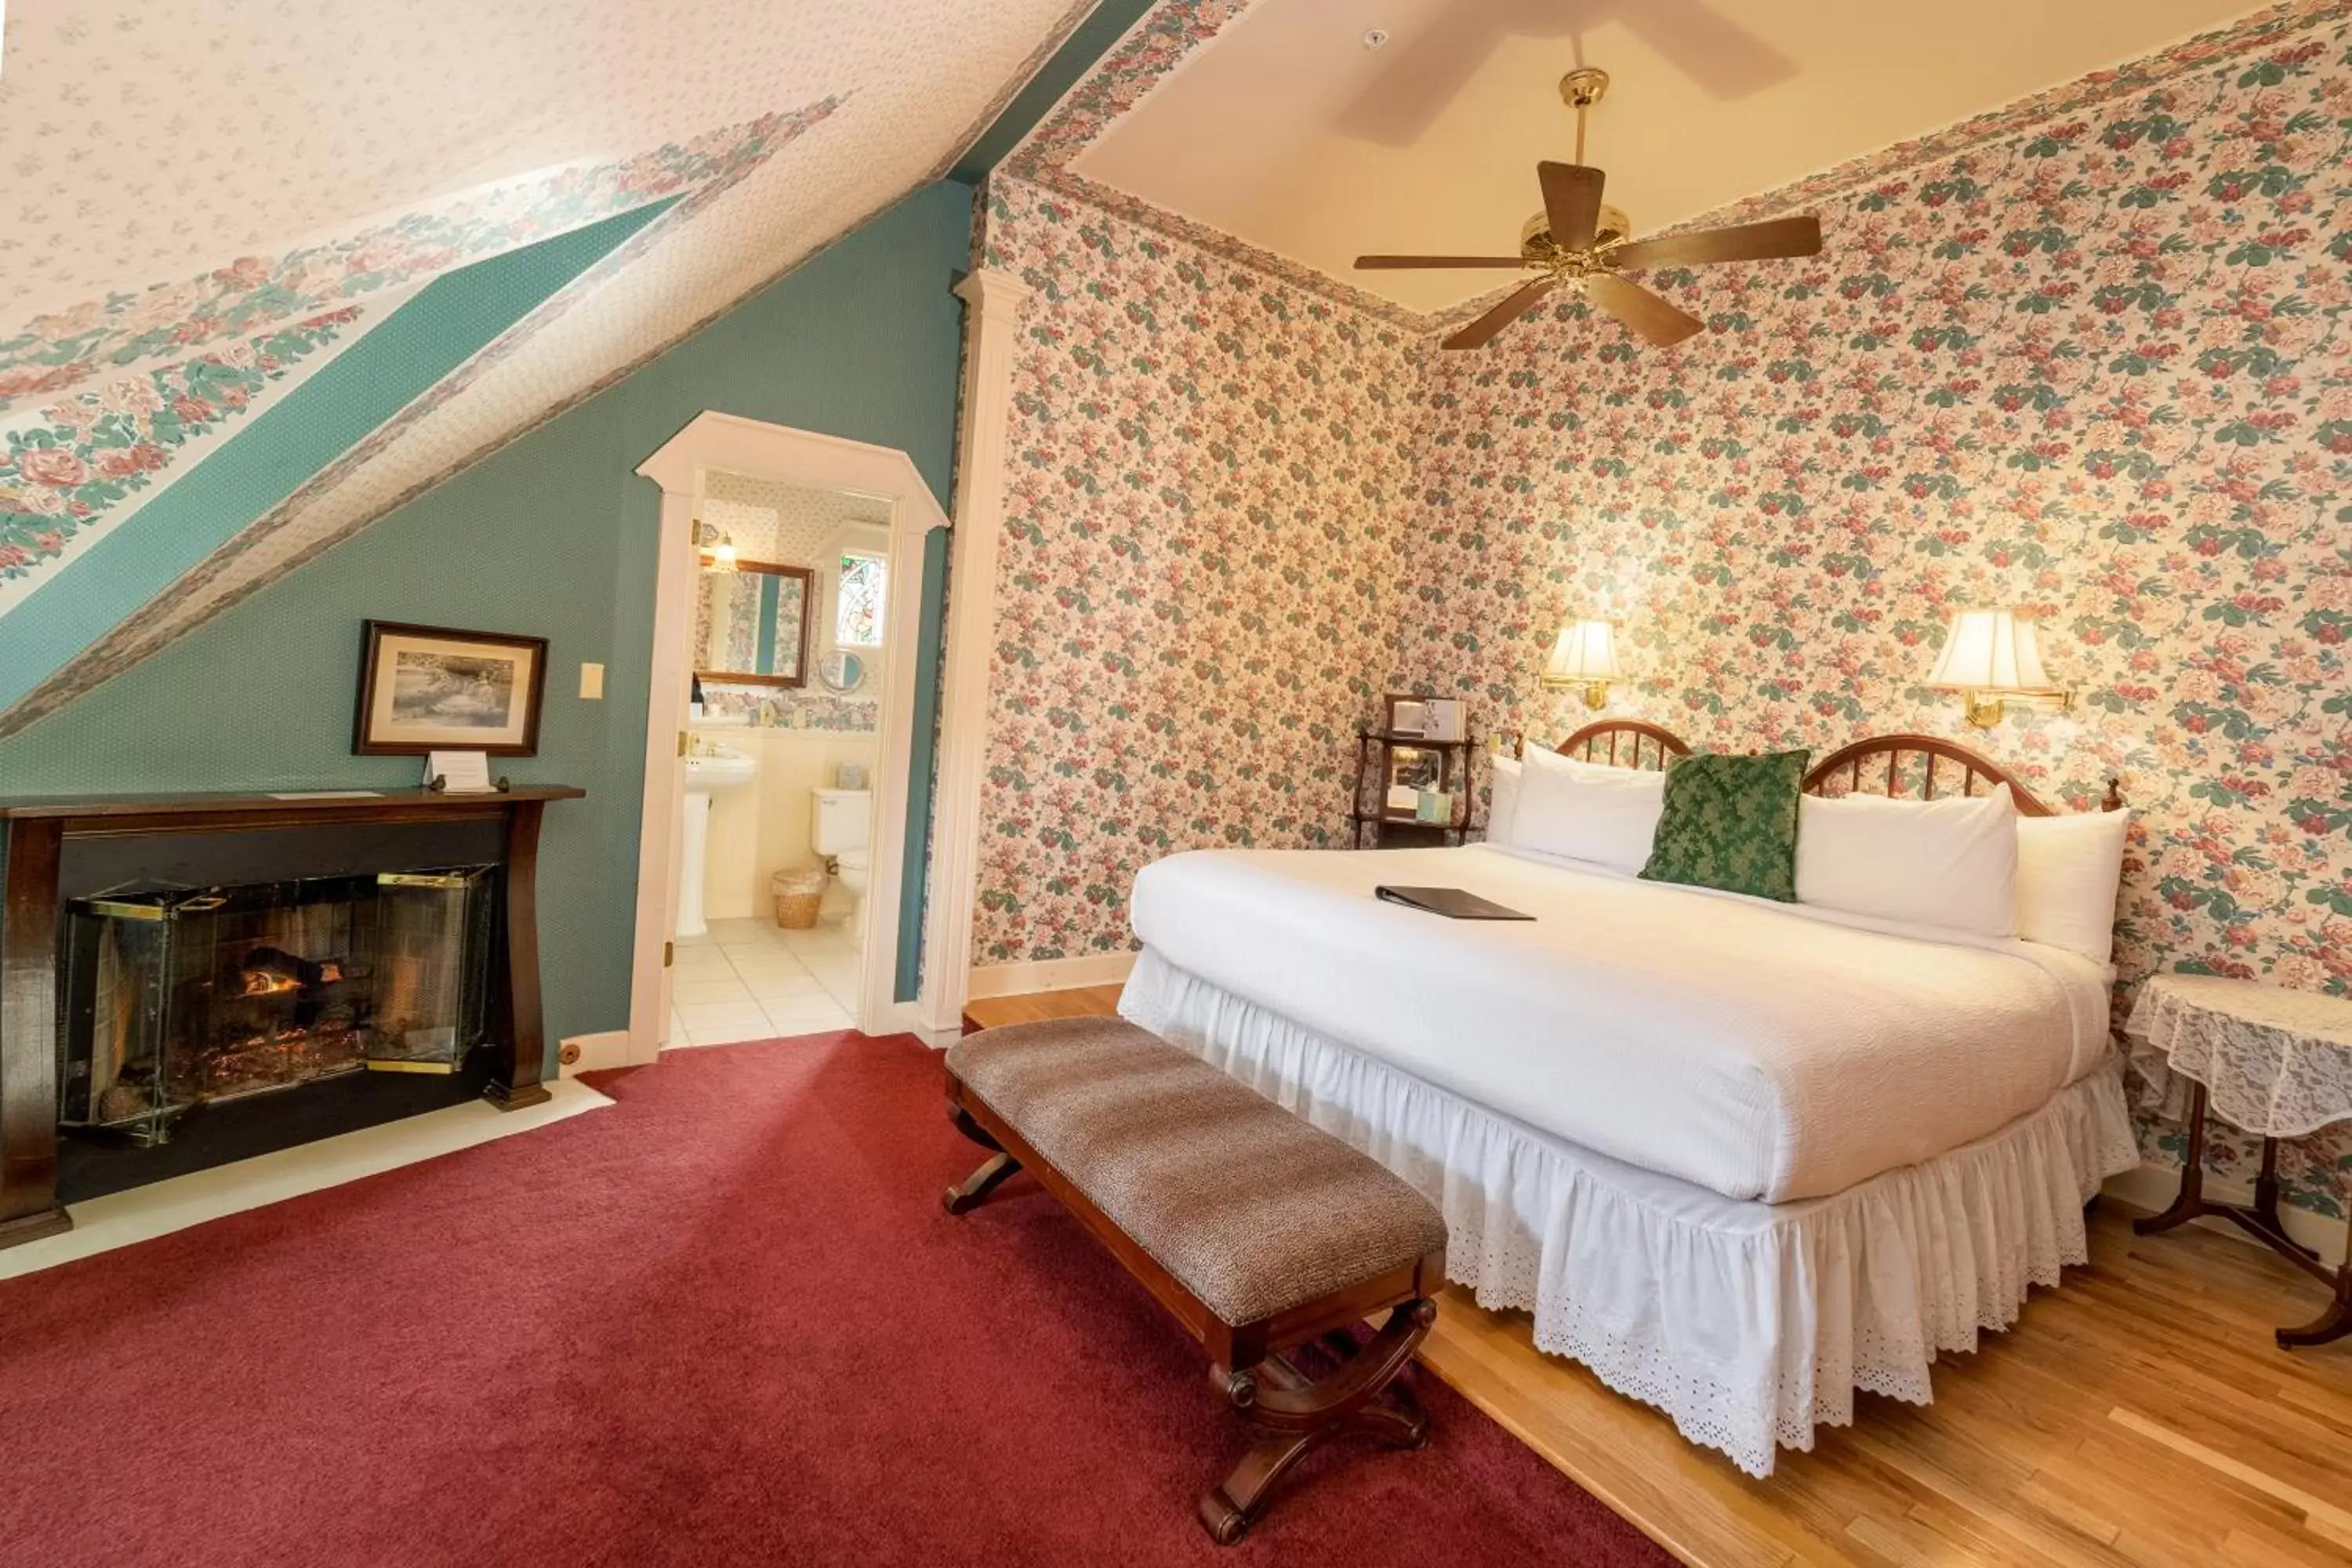 Deluxe King Suite in Yelton Manor Bed and Breakfast